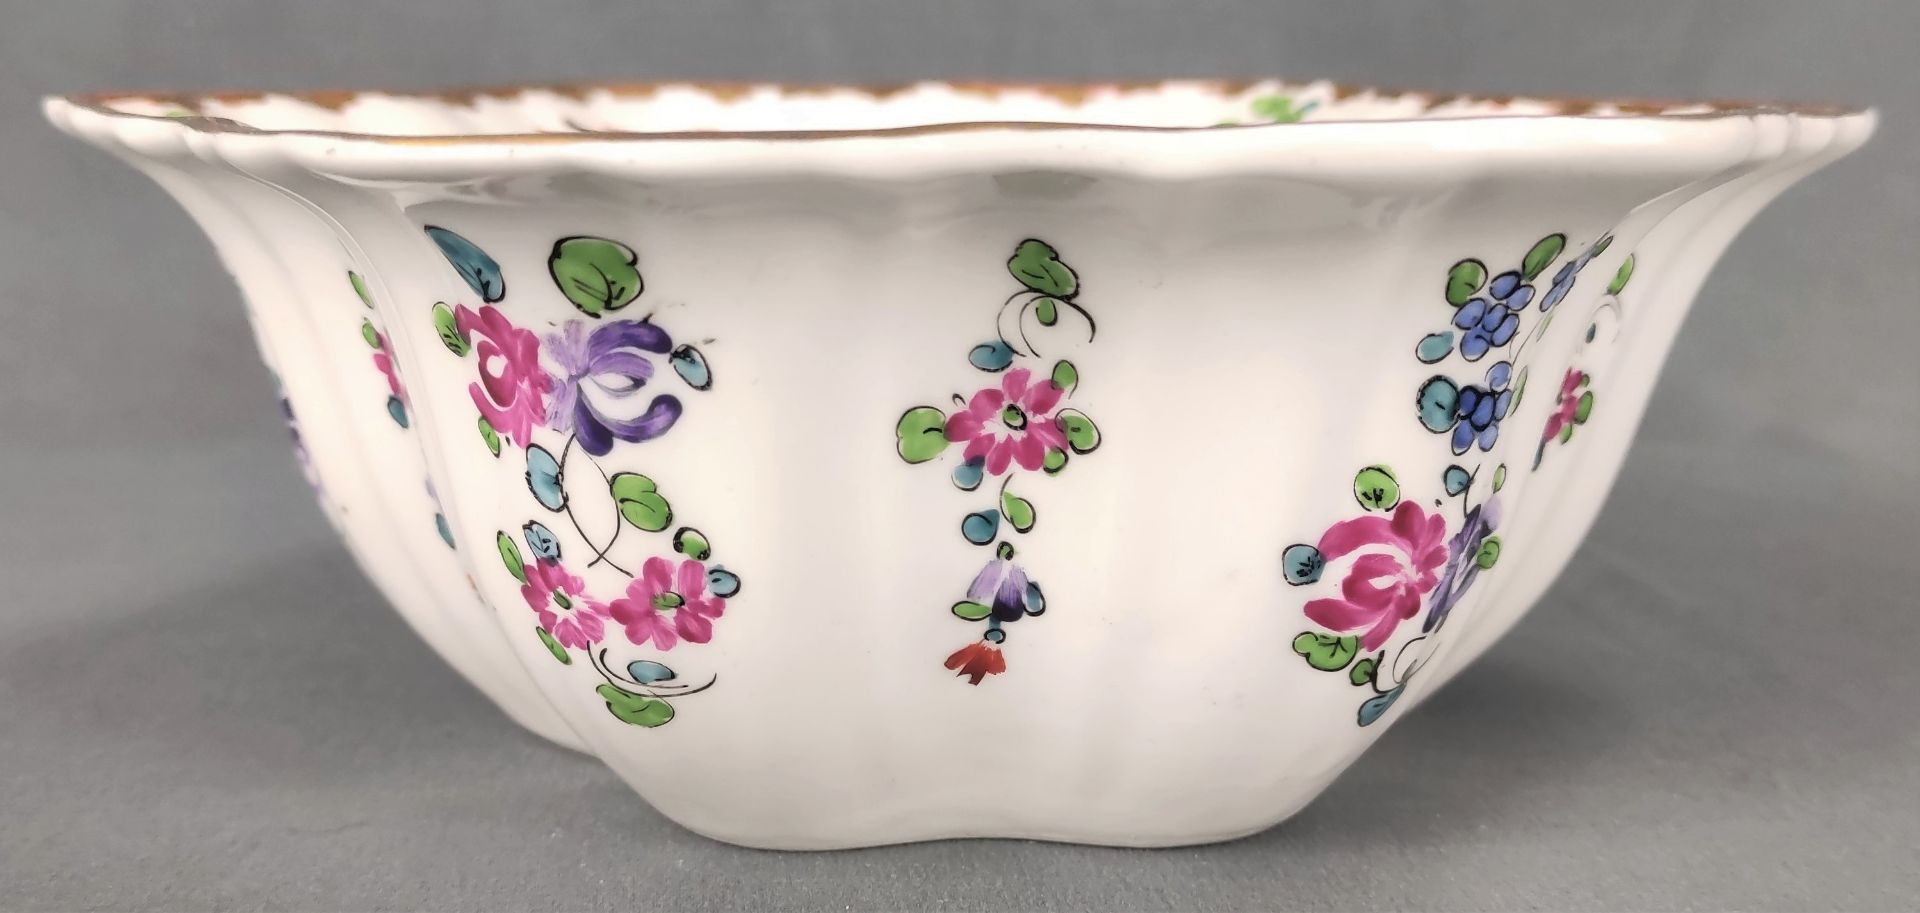 Bowl, star-shaped flared upwards, curved rims, finely polychrome decorated with floral motifs, gold